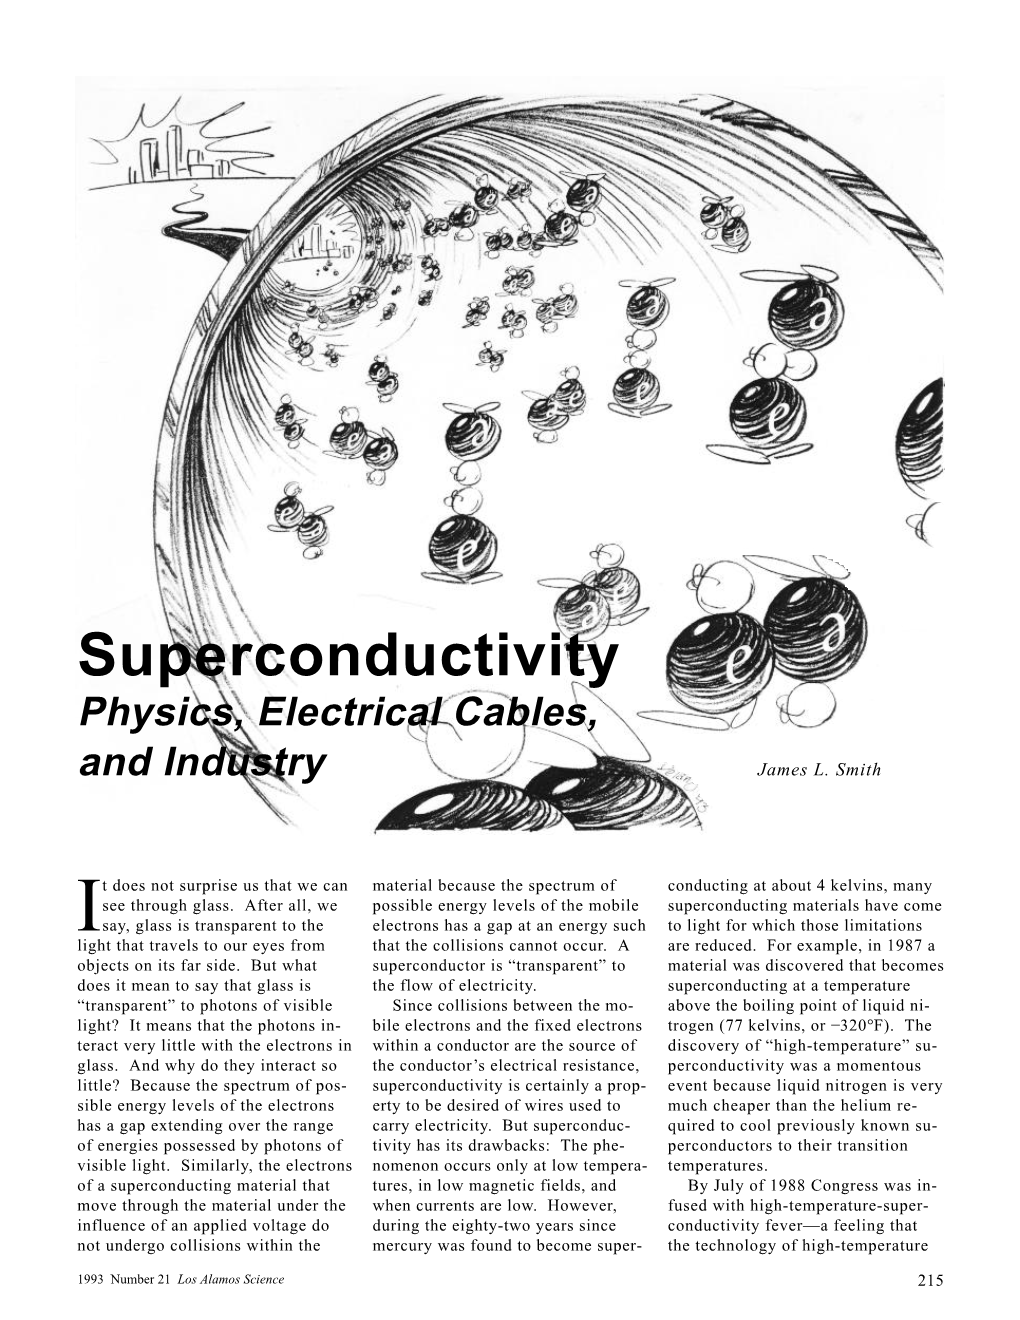 Superconductivity Physics, Electrical Cables, and Industry James L